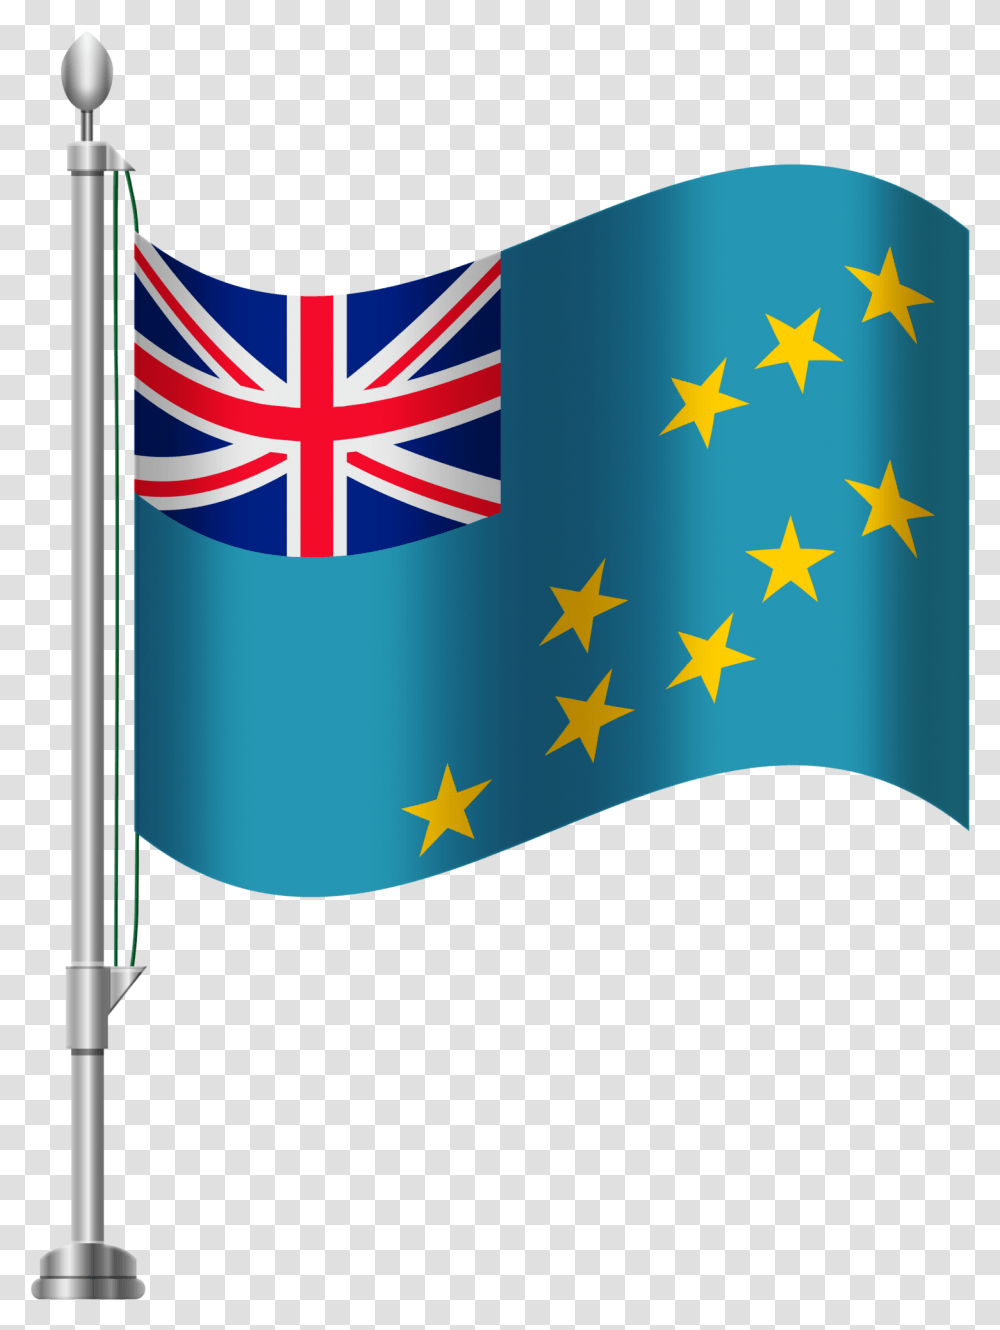 This File Is About Tuvalu Flag British Flag With Eu Stars, American Flag Transparent Png